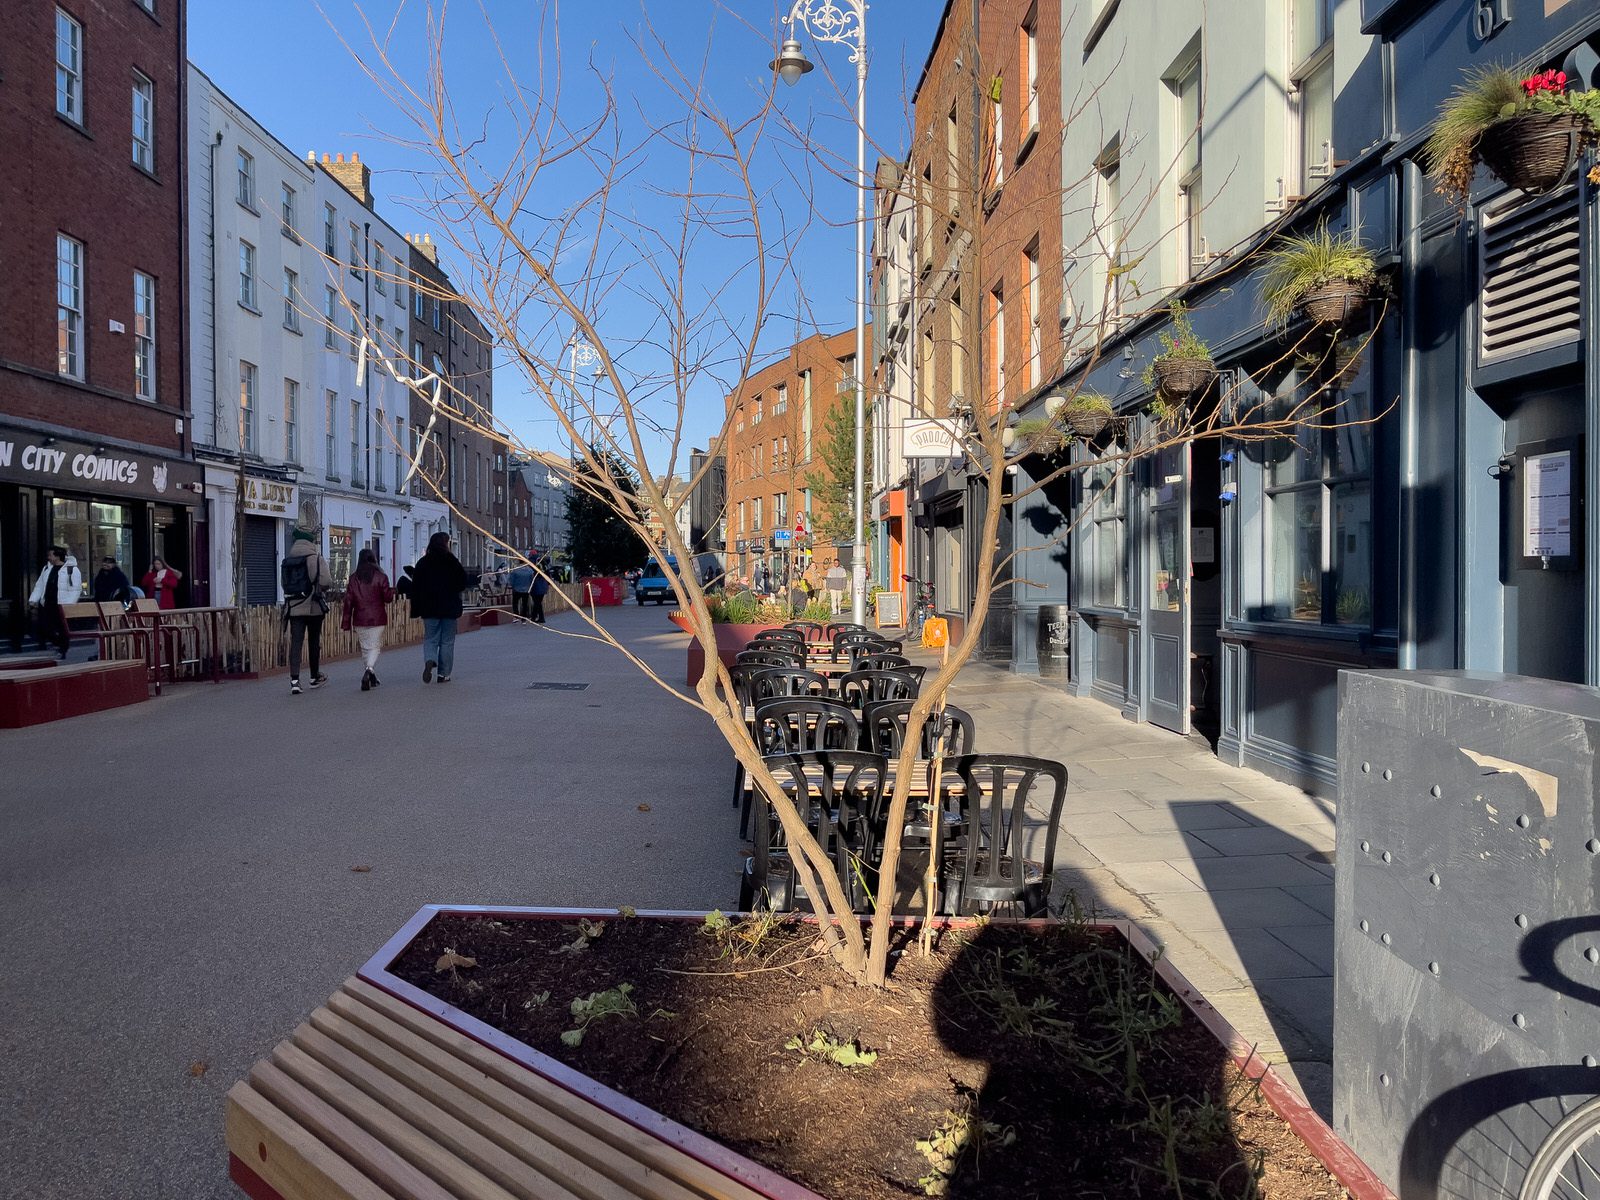 THE NEW STREET FURNITURE AND THE CHRISTMAS TREE [HAVE ARRIVED IN CAPEL STREET]-225852-1